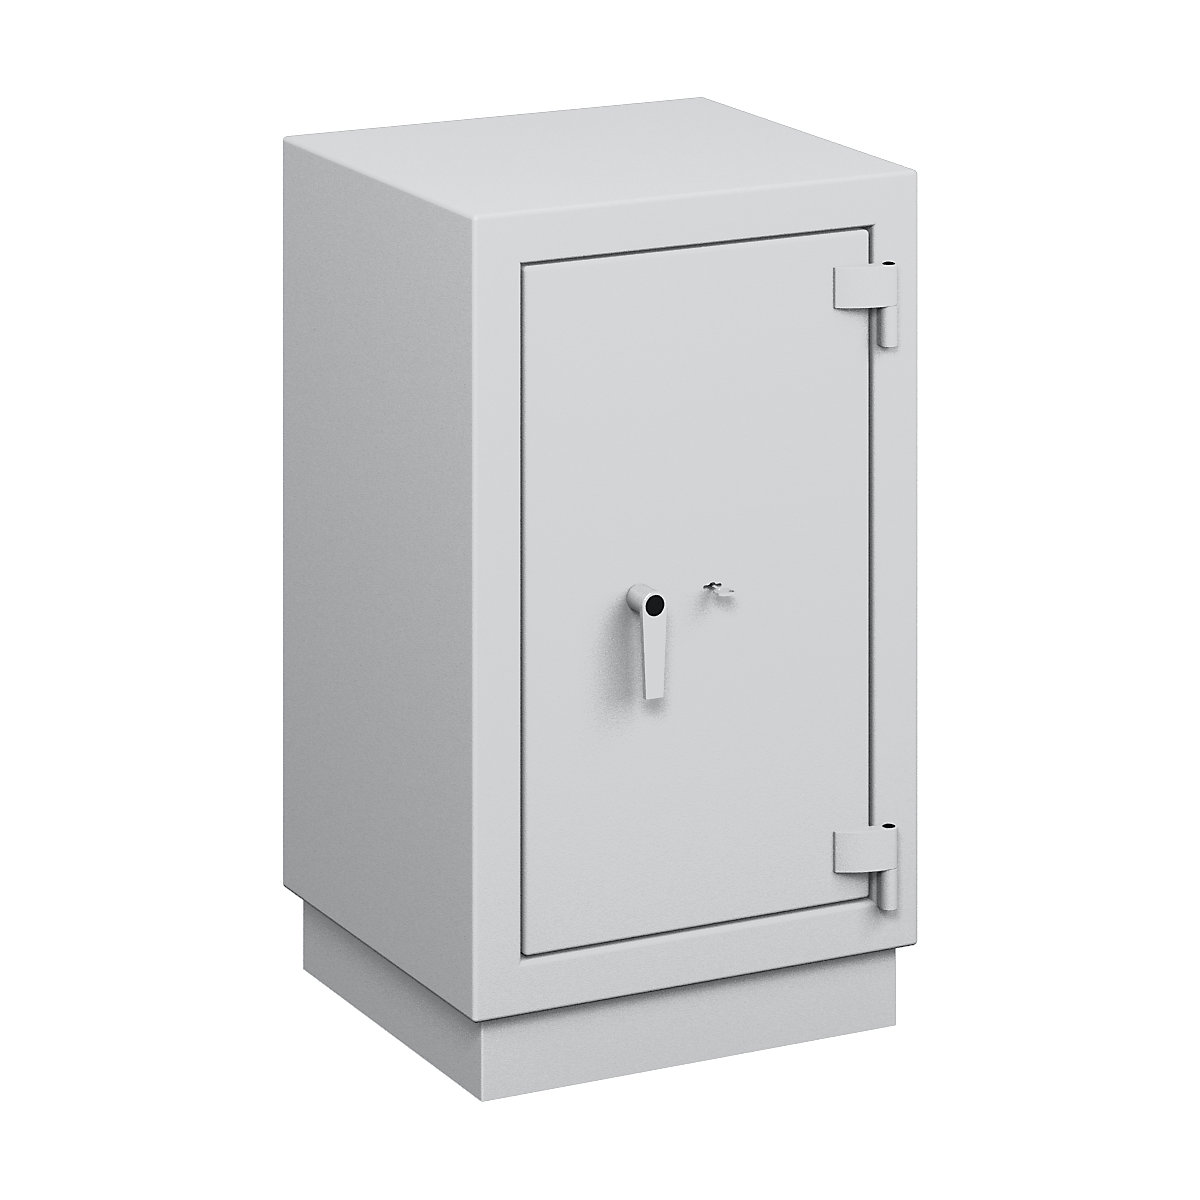 Fire resistant safety cabinet, VDMA B, S2, S 120 P, HxWxD 1050 x 605 x 560 mm-9